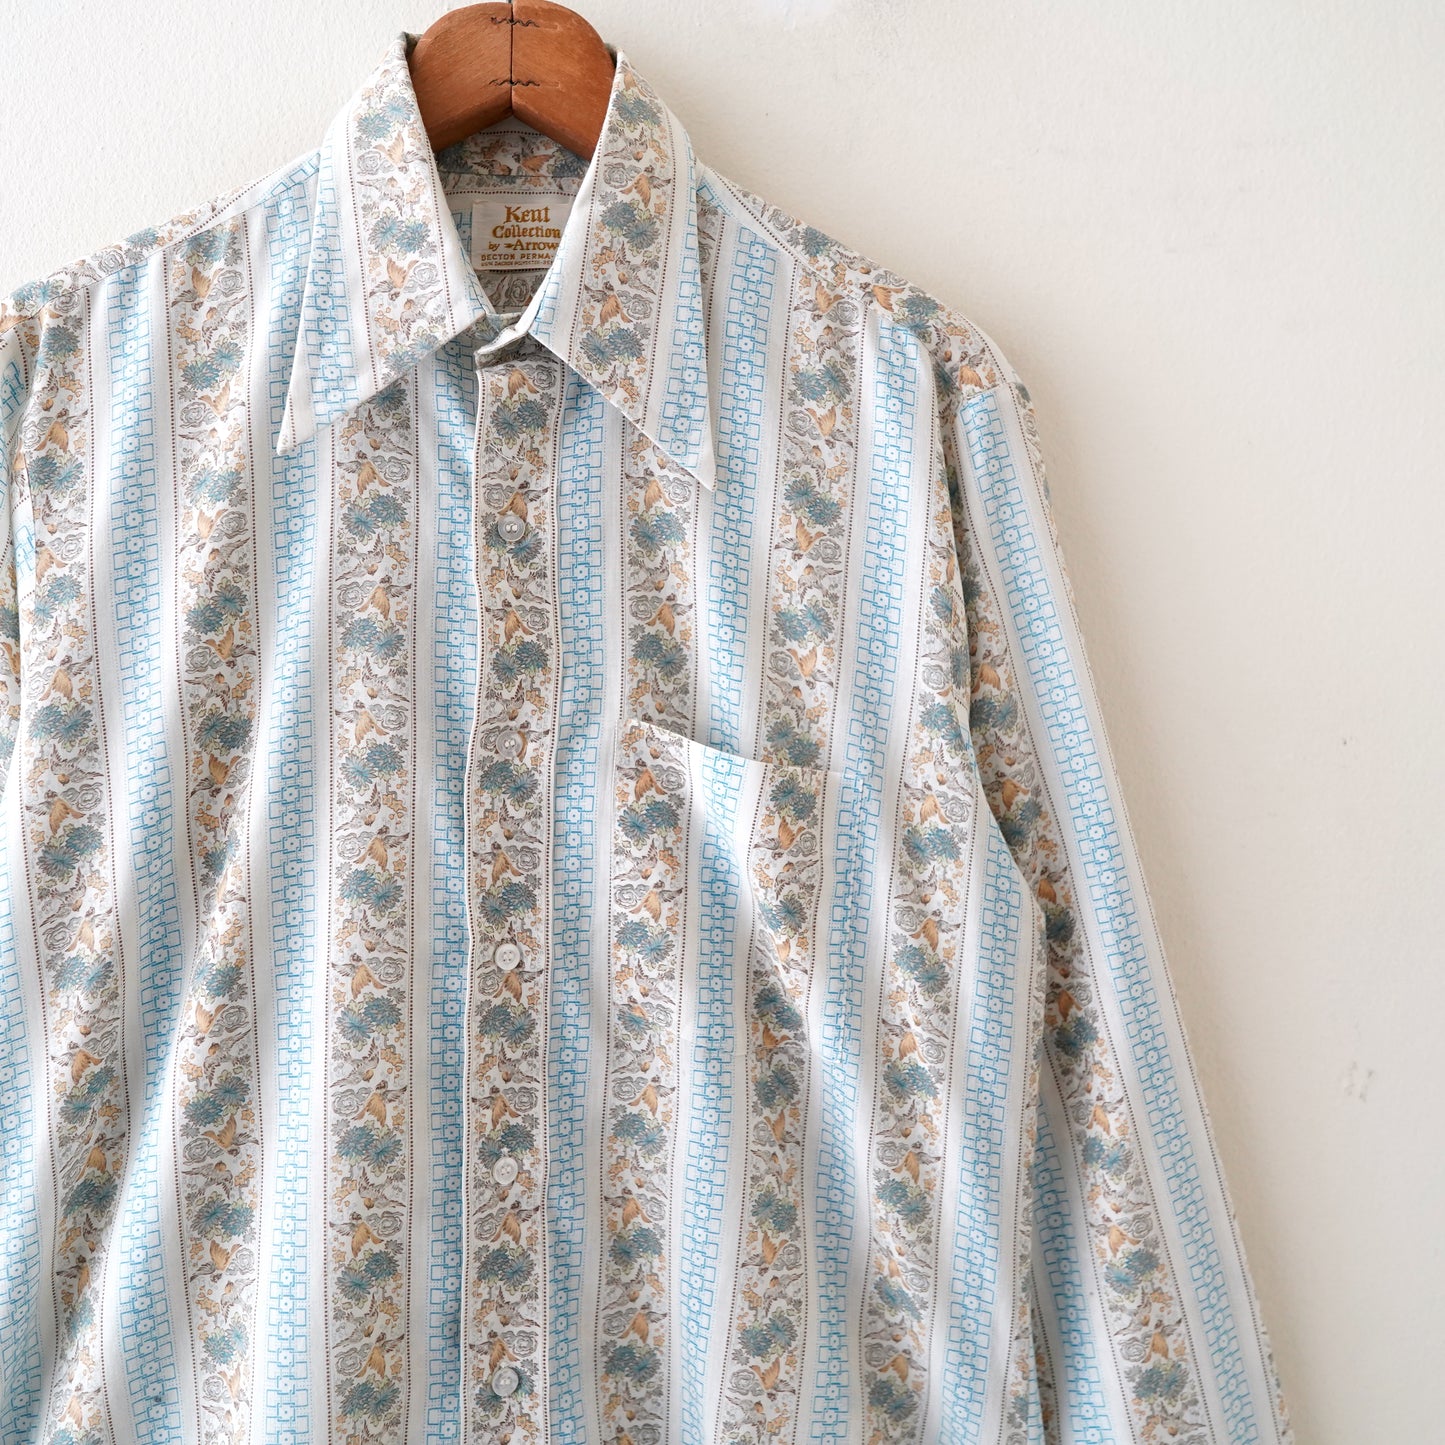 70s patterned shirt